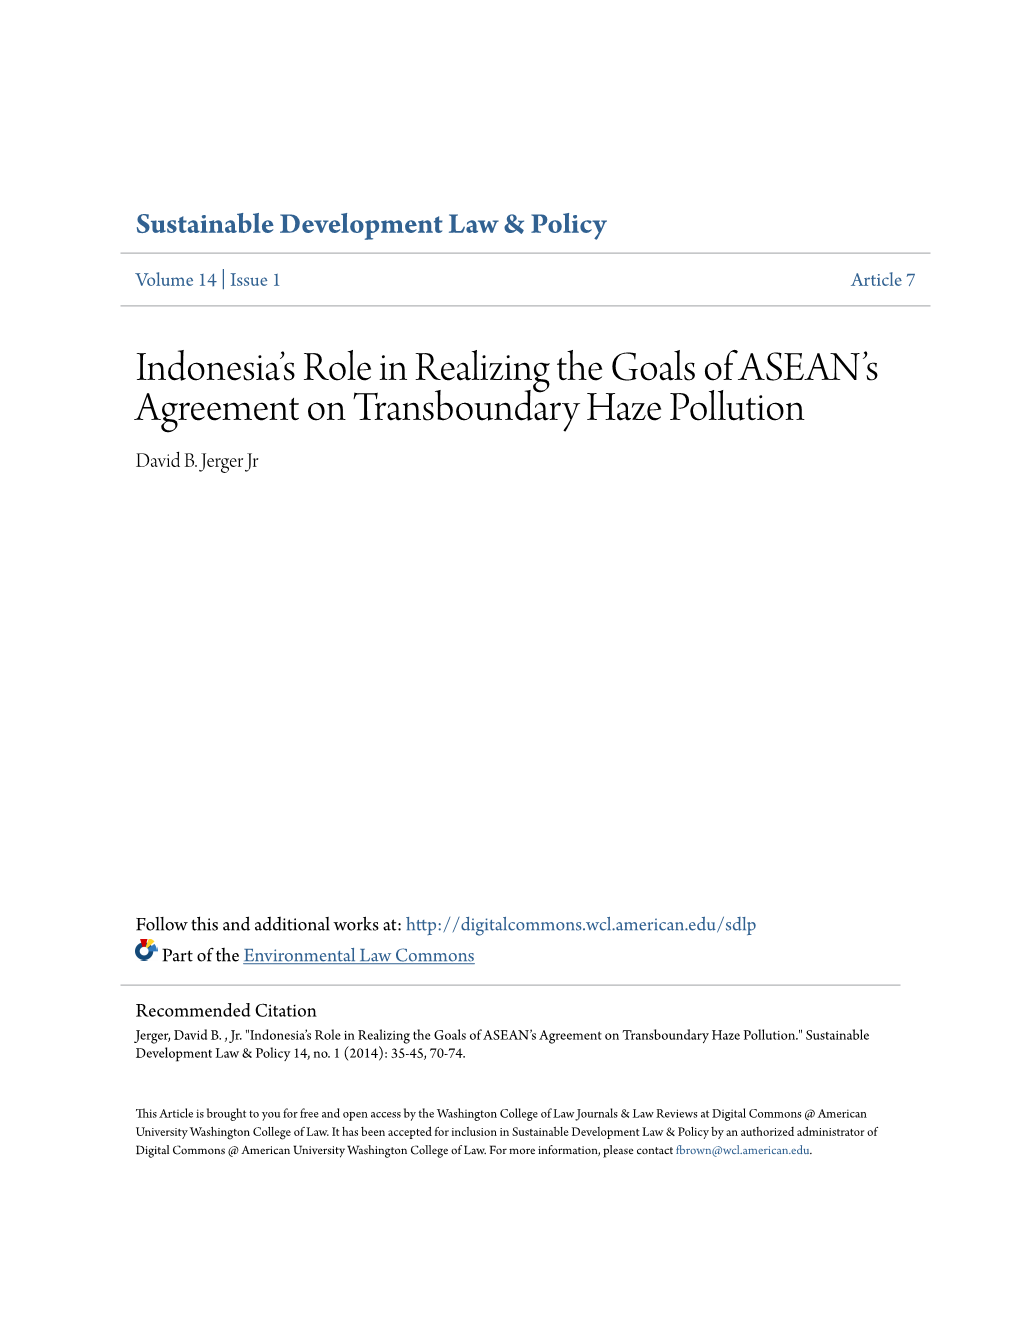 Indonesia's Role in Realizing the Goals of ASEAN's Agreement on Transboundary Haze Pollution Continued from Page 45 (Last Visited Feb